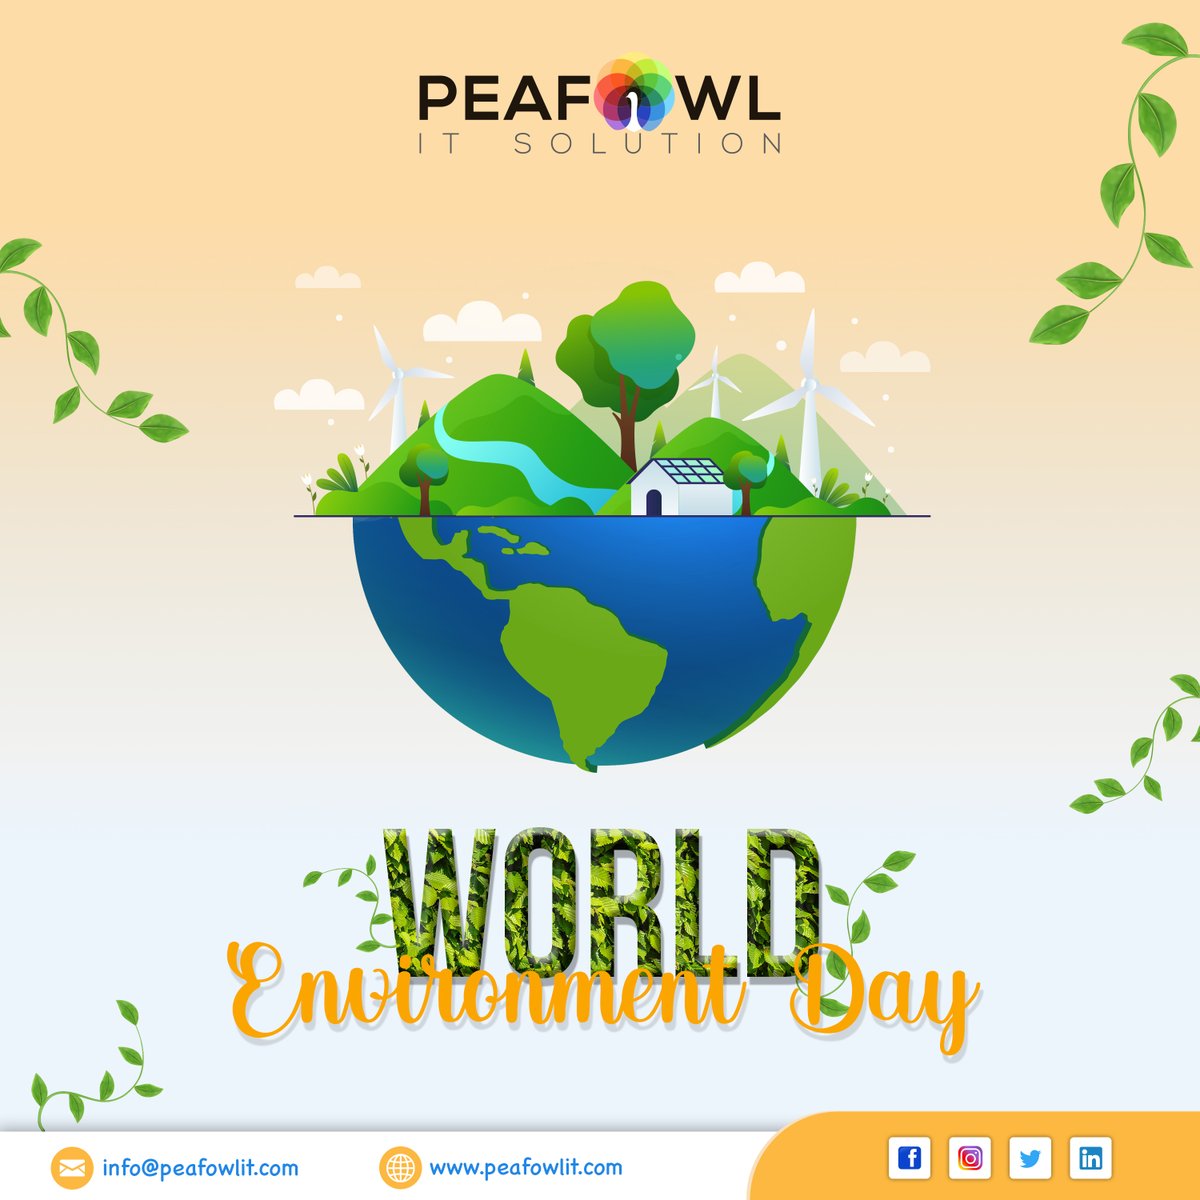 Happy World Environment Day! 
Let's unite to protect and restore our planet. Together, we can make a difference and create a sustainable future for all. 🌍🌿
 #WorldEnvironmentDay #SustainableLiving #GreenPledge